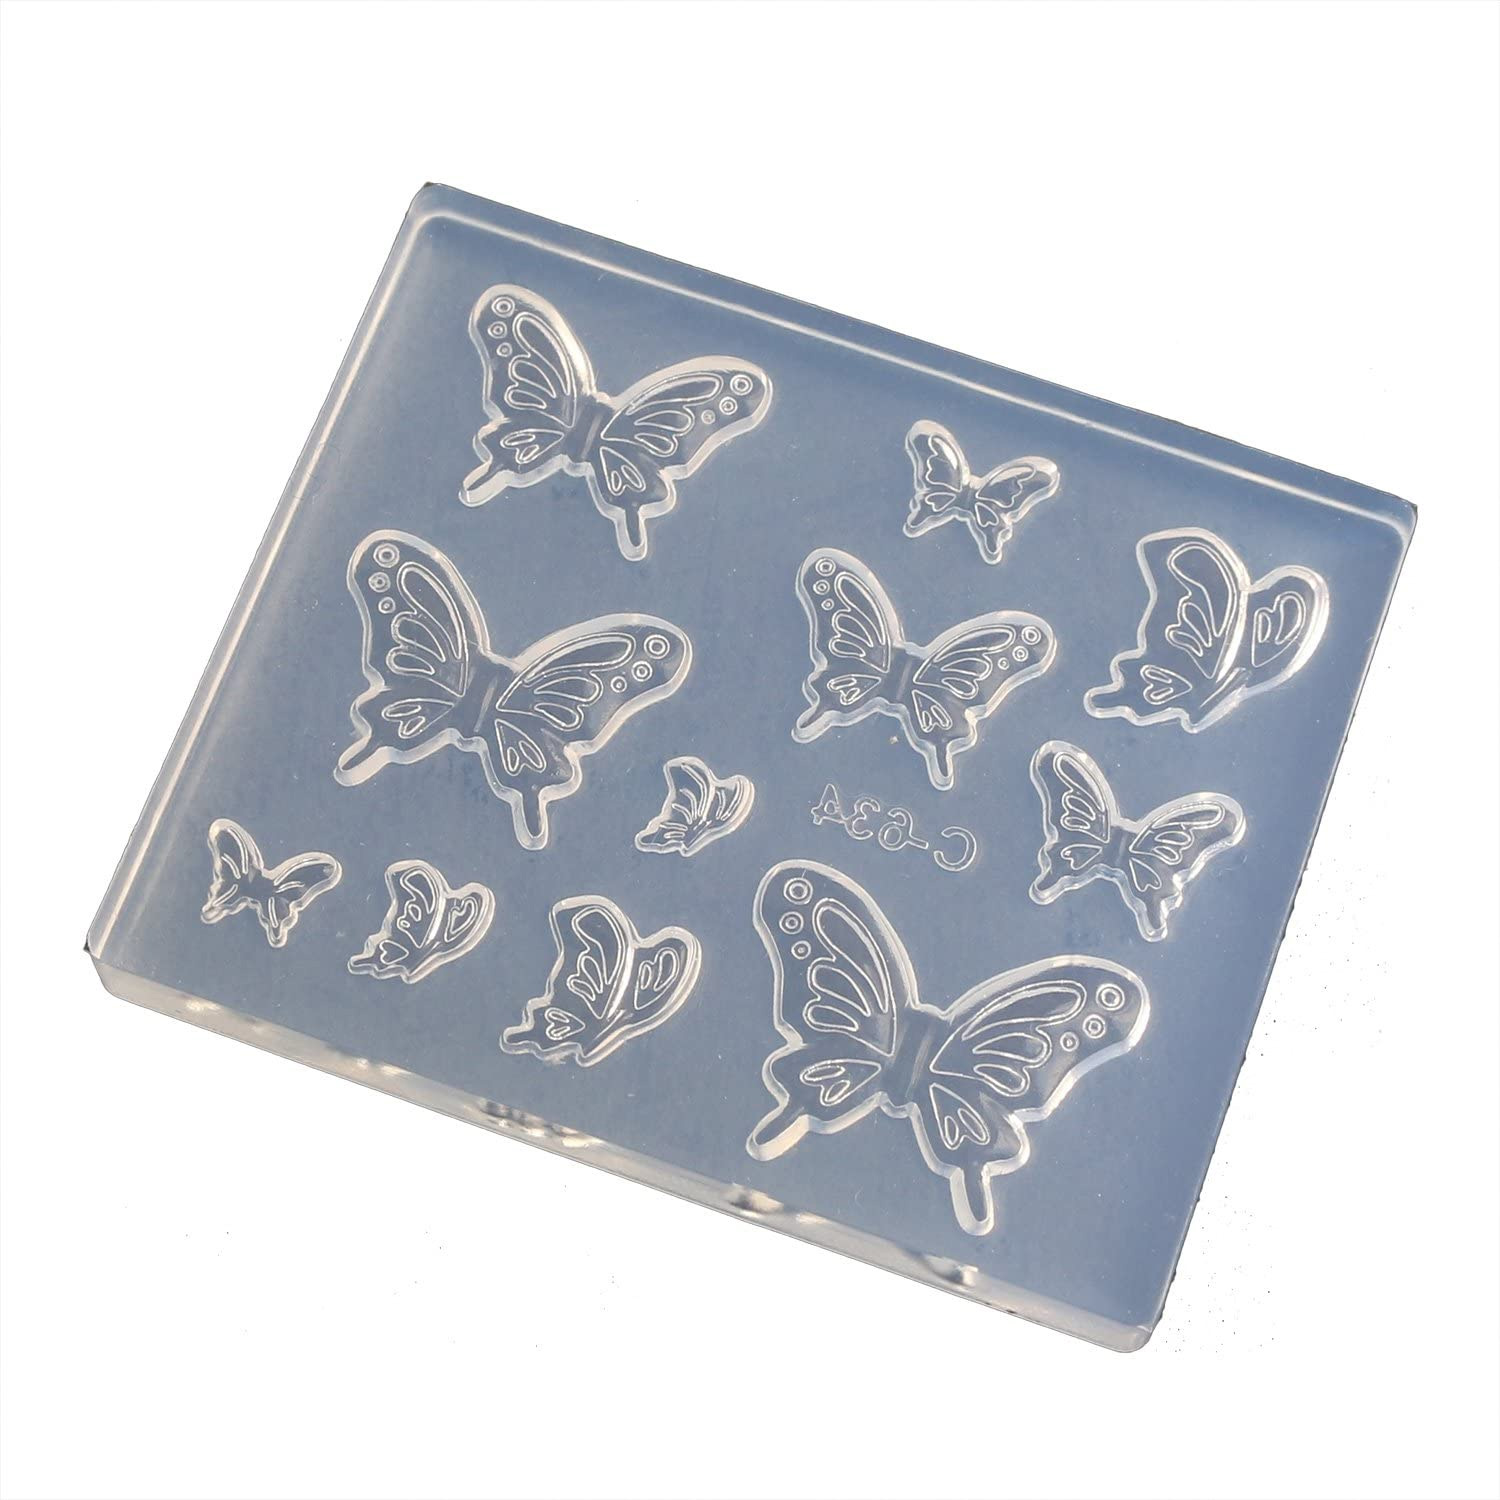 KAM-REJ-634  Resin Crafting Silicone Mold  (pcs)